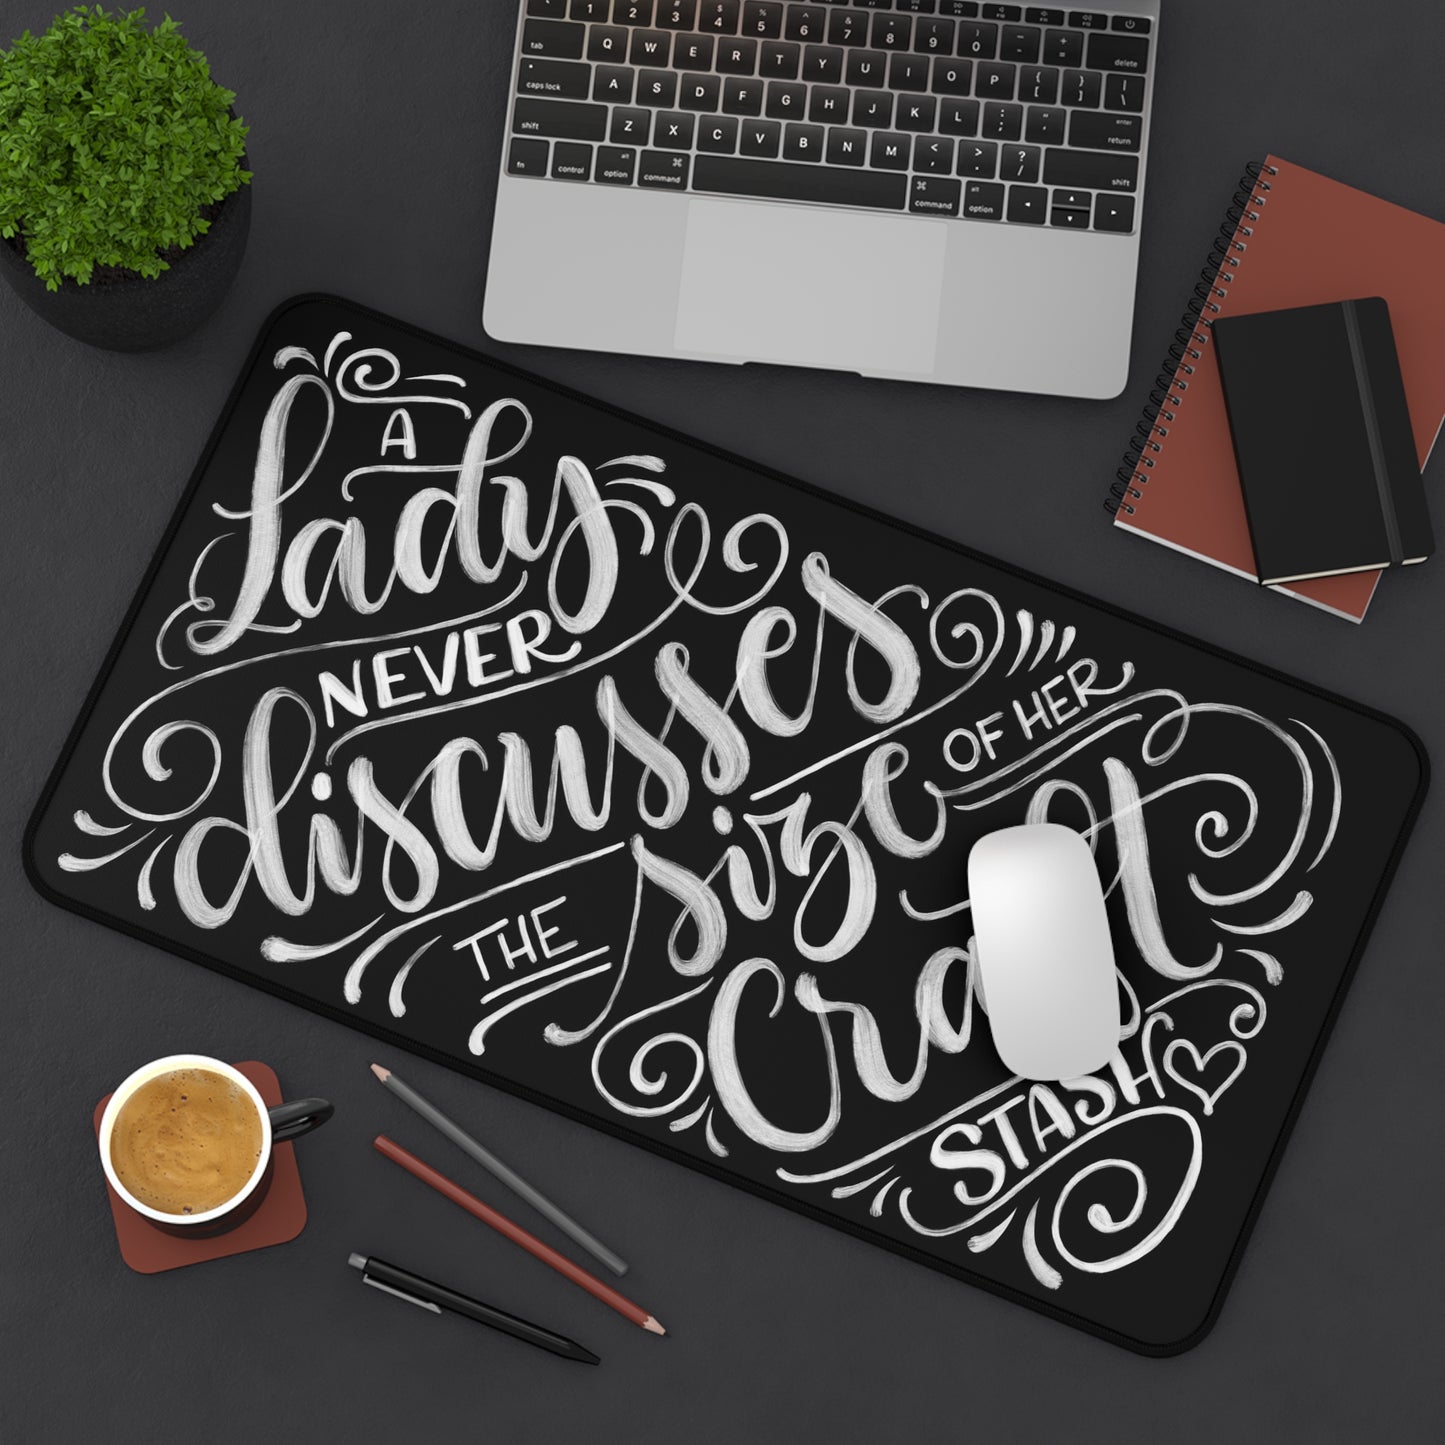 A Lady never discusses the size of her craft stash - Desk Mat - howjoyfulshop